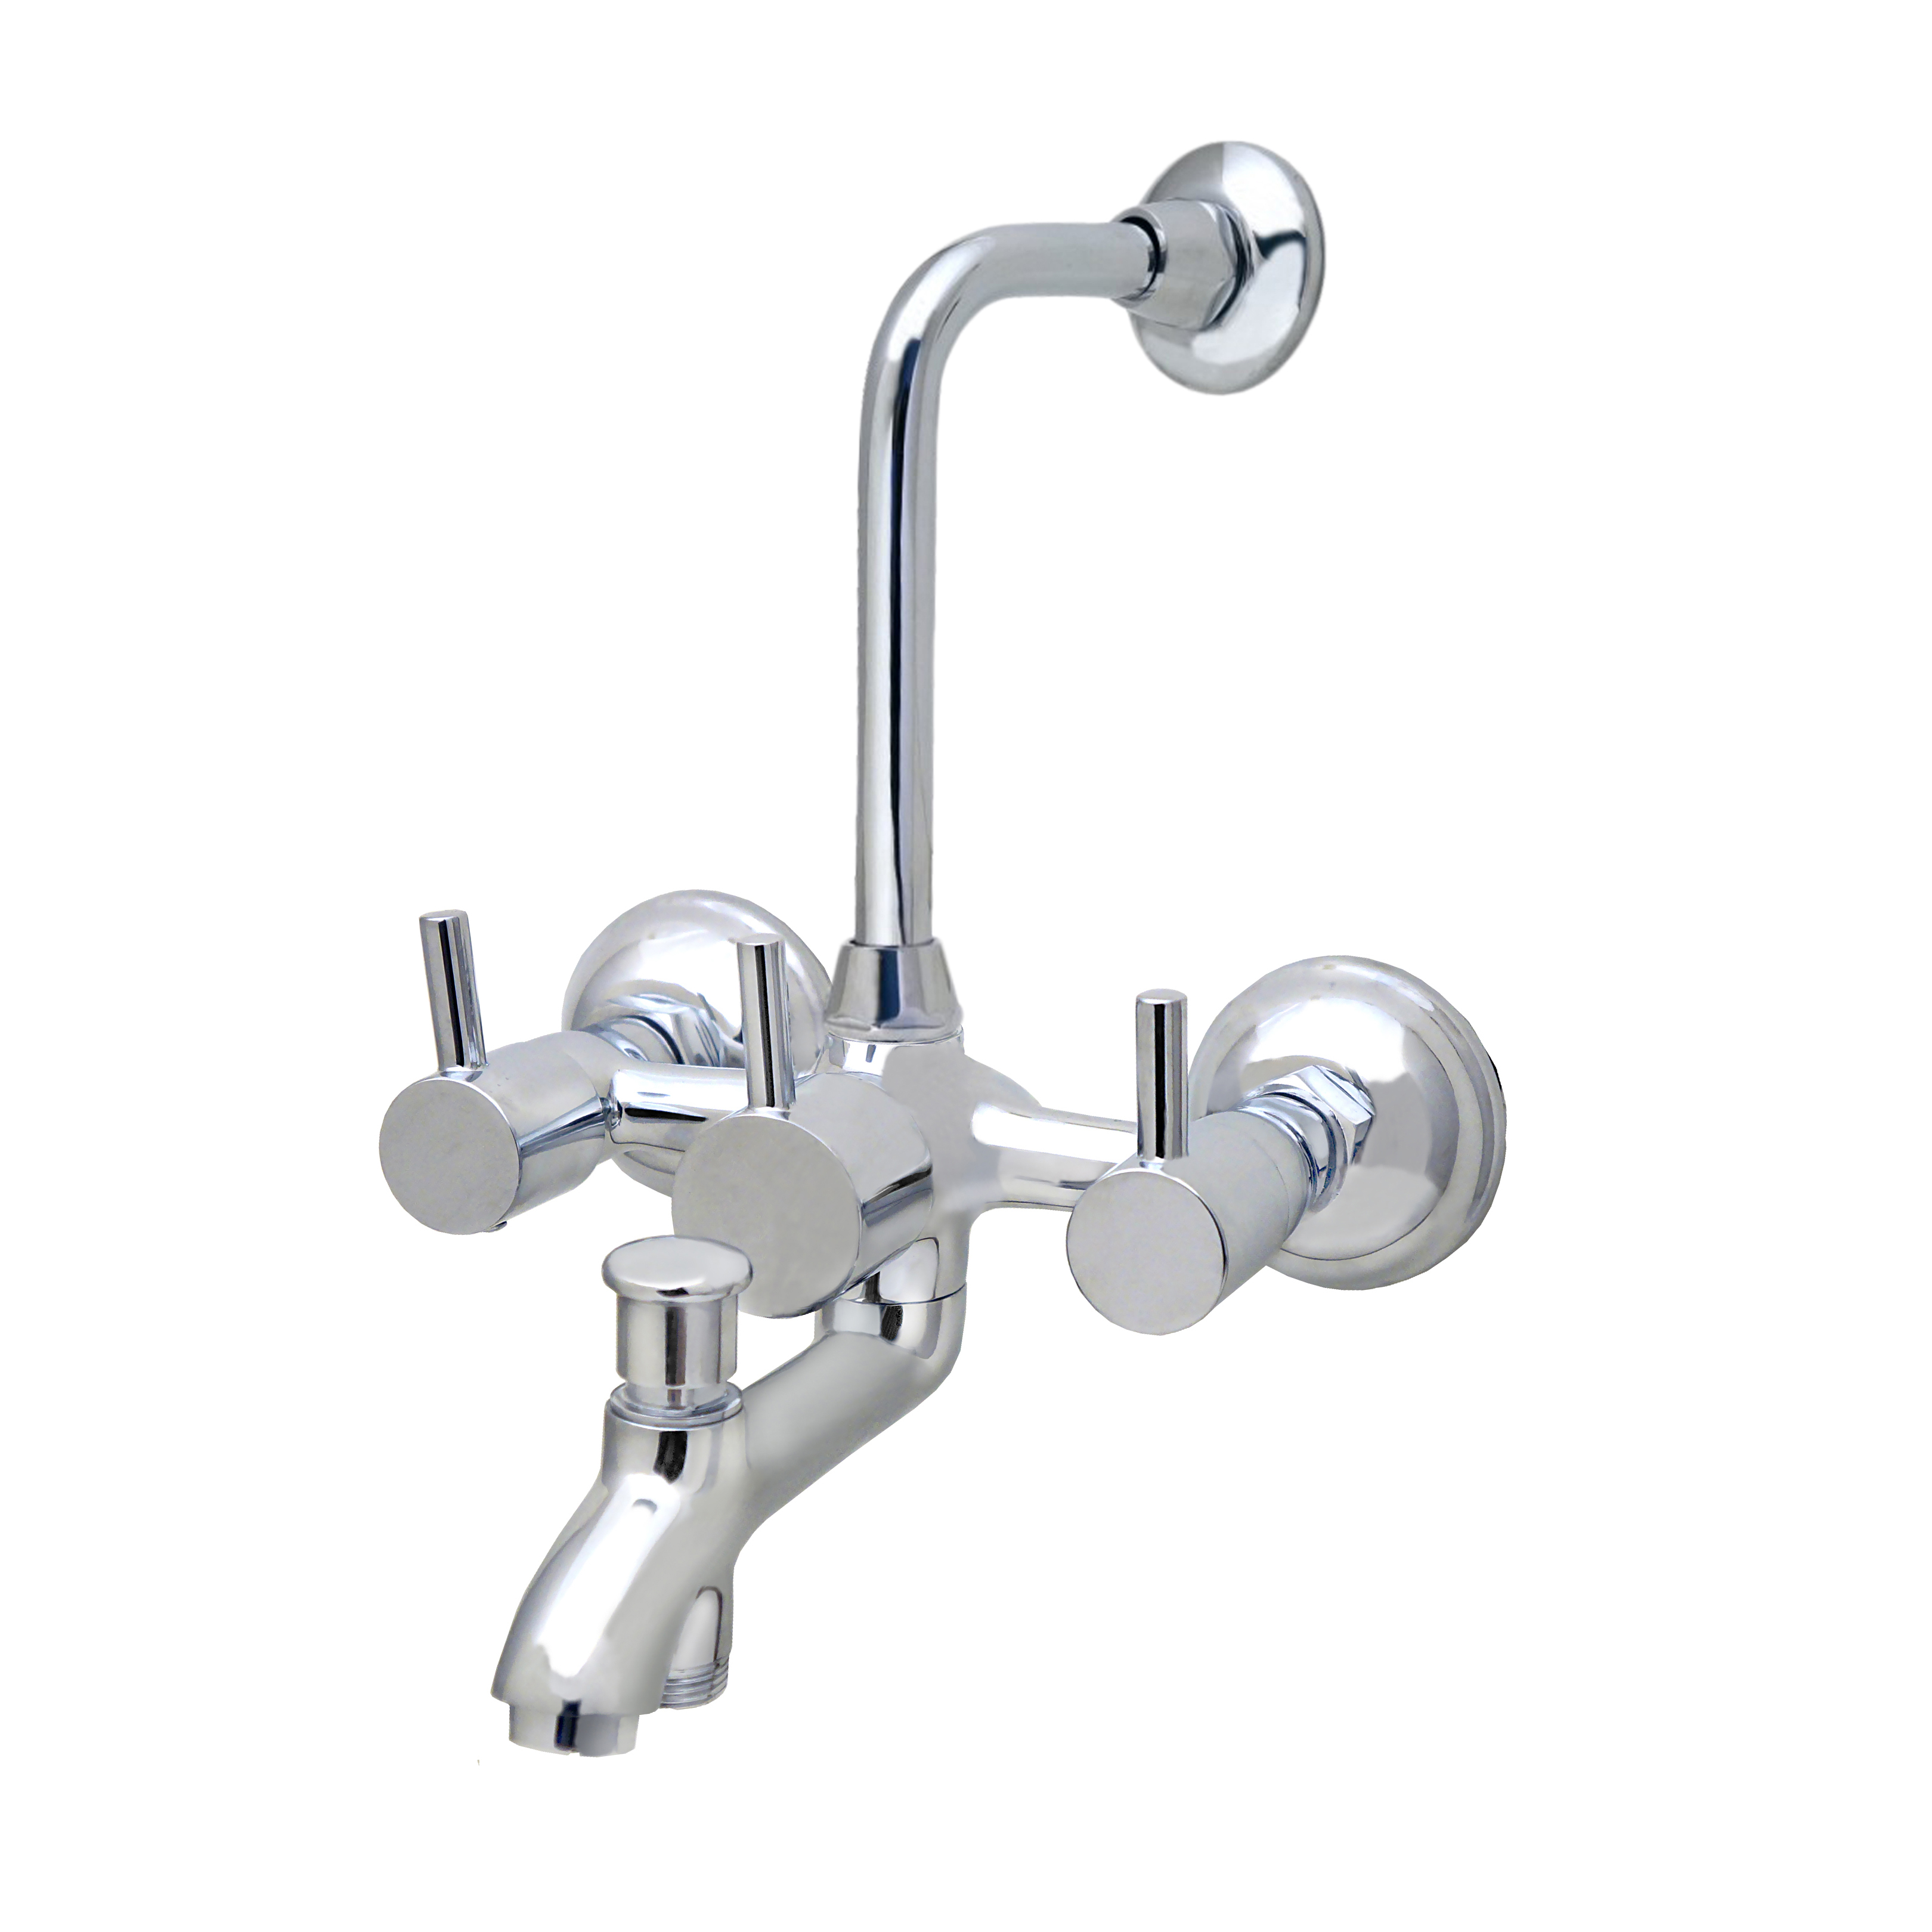 Turin Wall Mixer 3-In-1 with provision for Telephonic & Overhead Shower